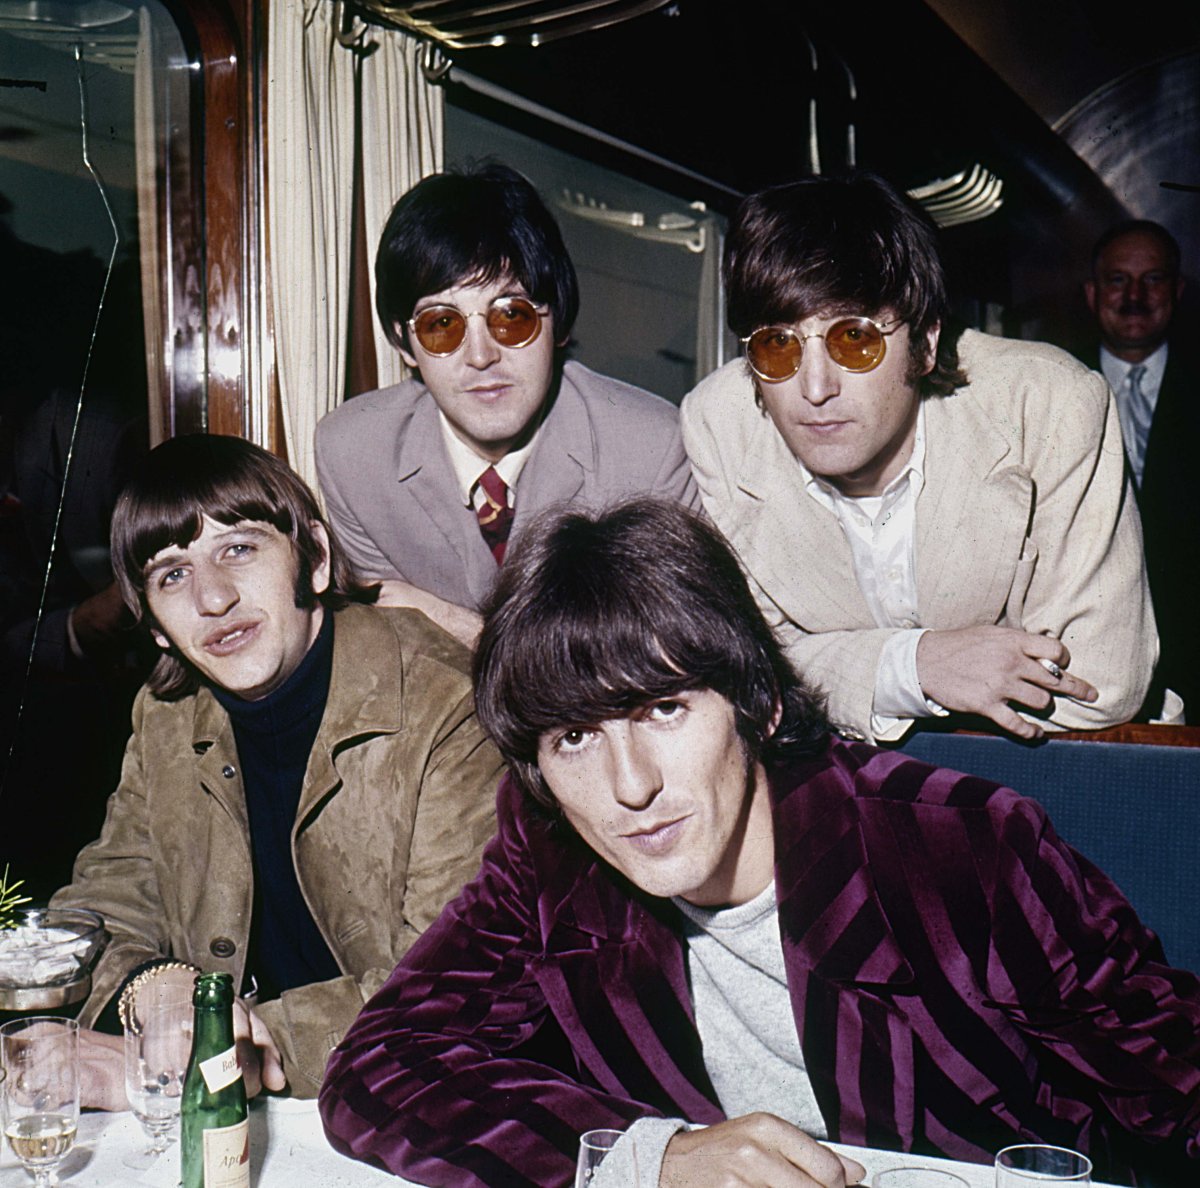 The Beatles pose together circa August 1966.